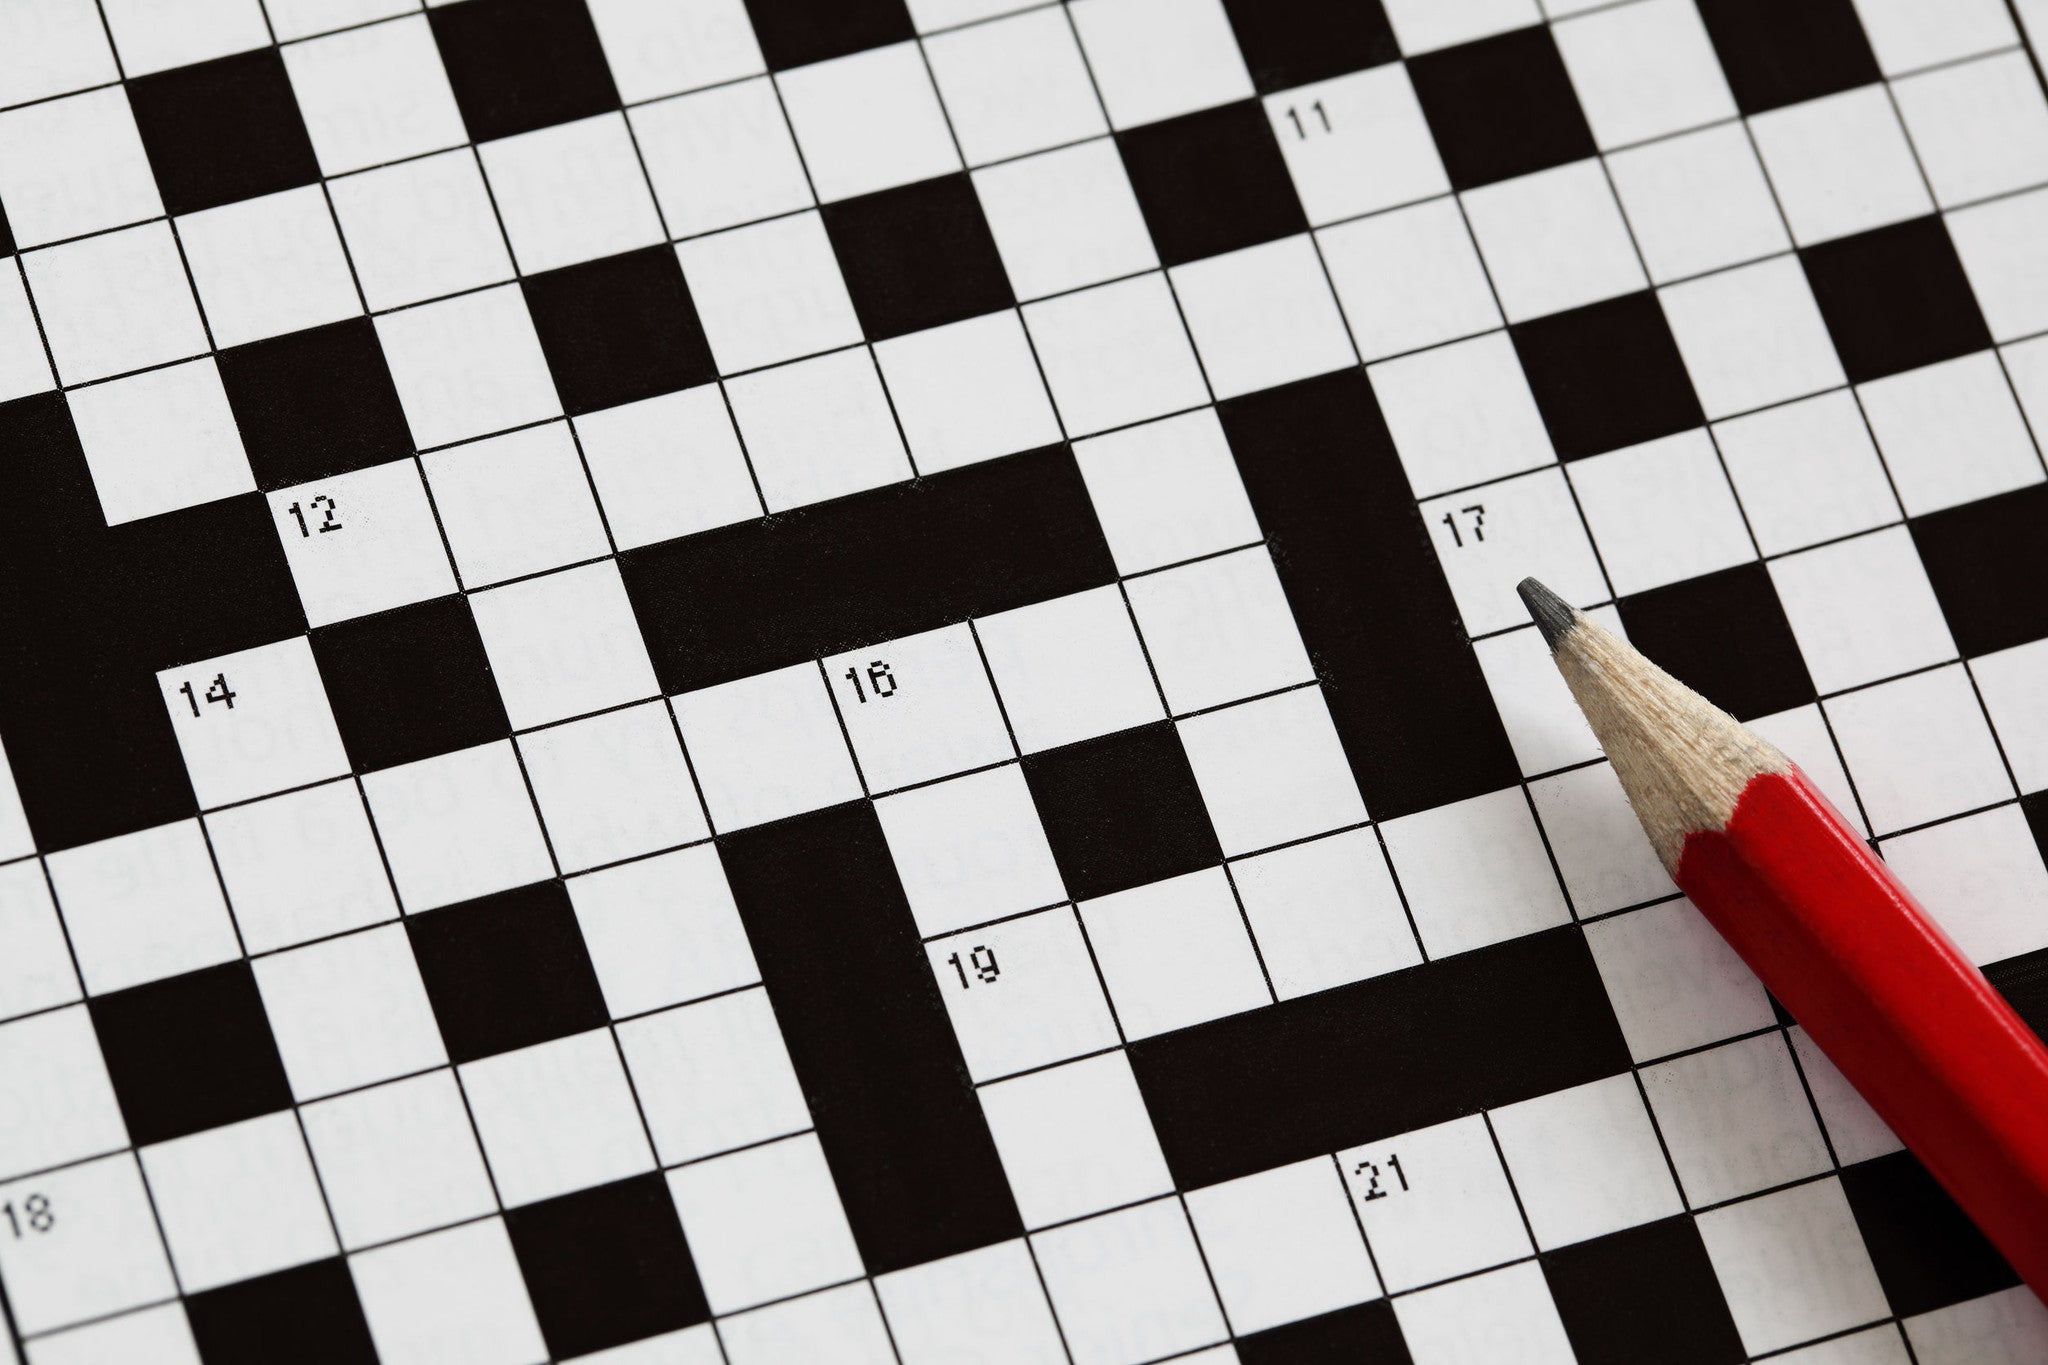 41  Crossword Puzzle For Customer Service